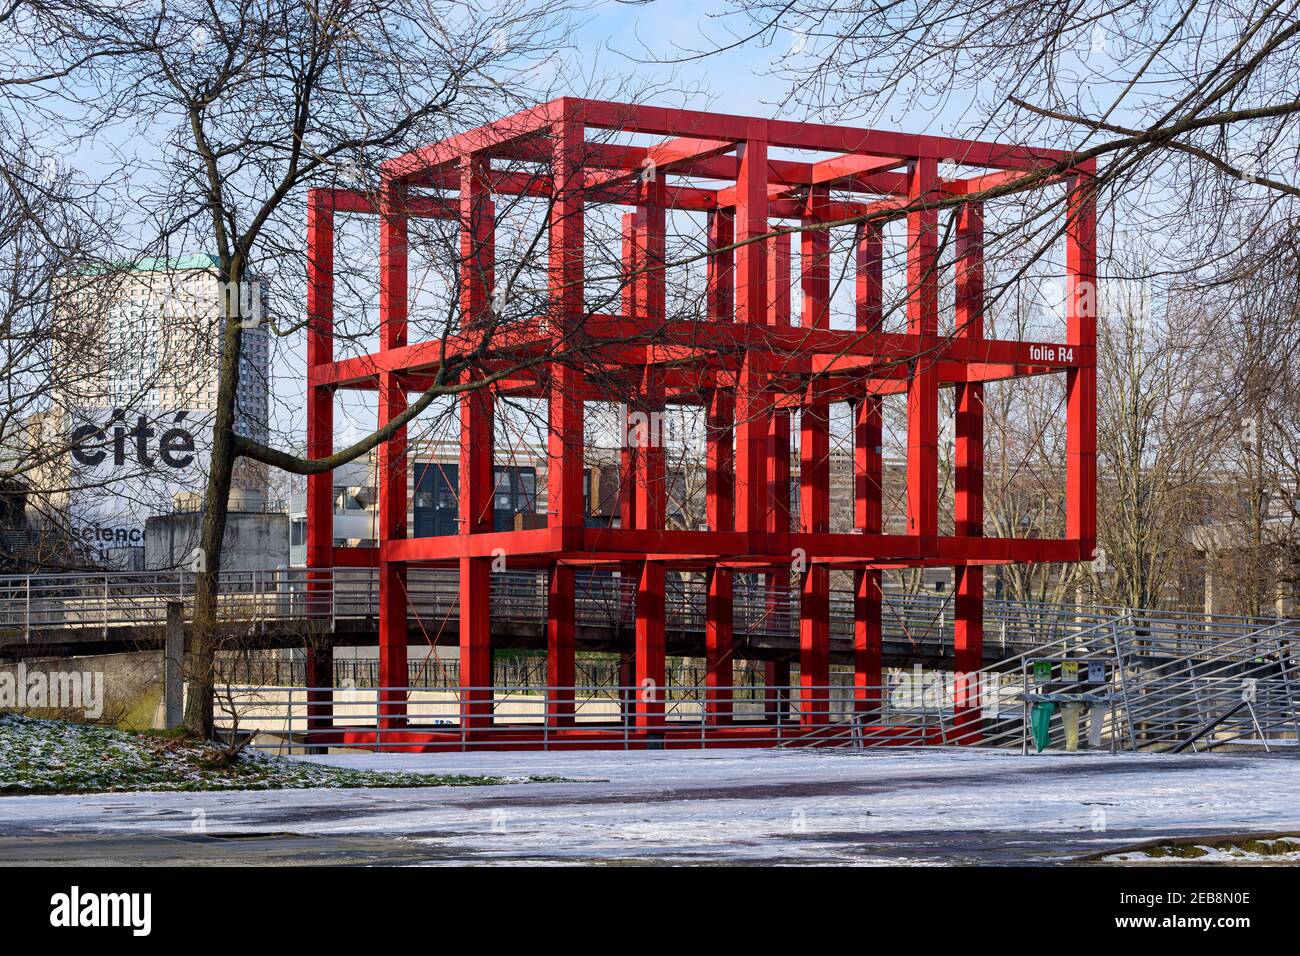 The 'R4 Folie' is one of the 26 bright red metal structures called 'folies' scattered throughout the Parc de la Villette in Paris 19th. Stock Photo